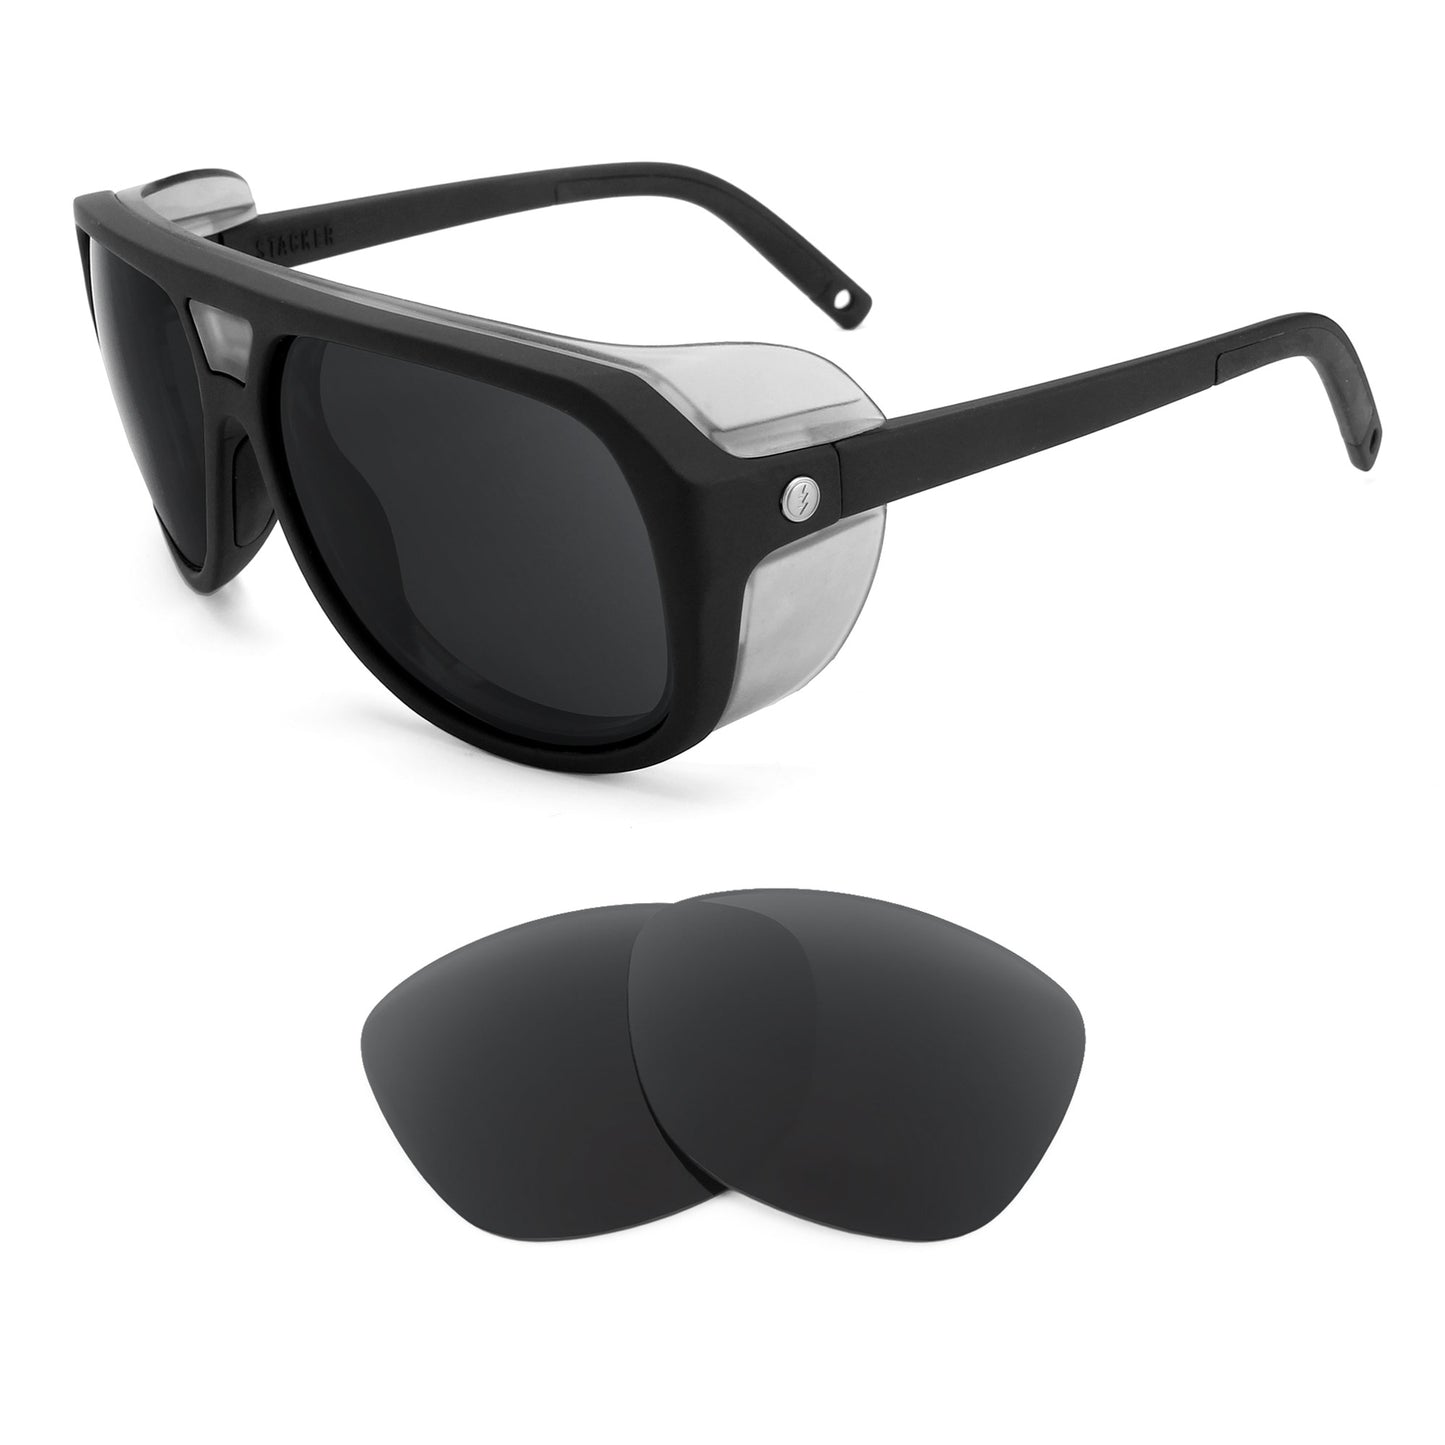 Electric Stacker sunglasses with replacement lenses